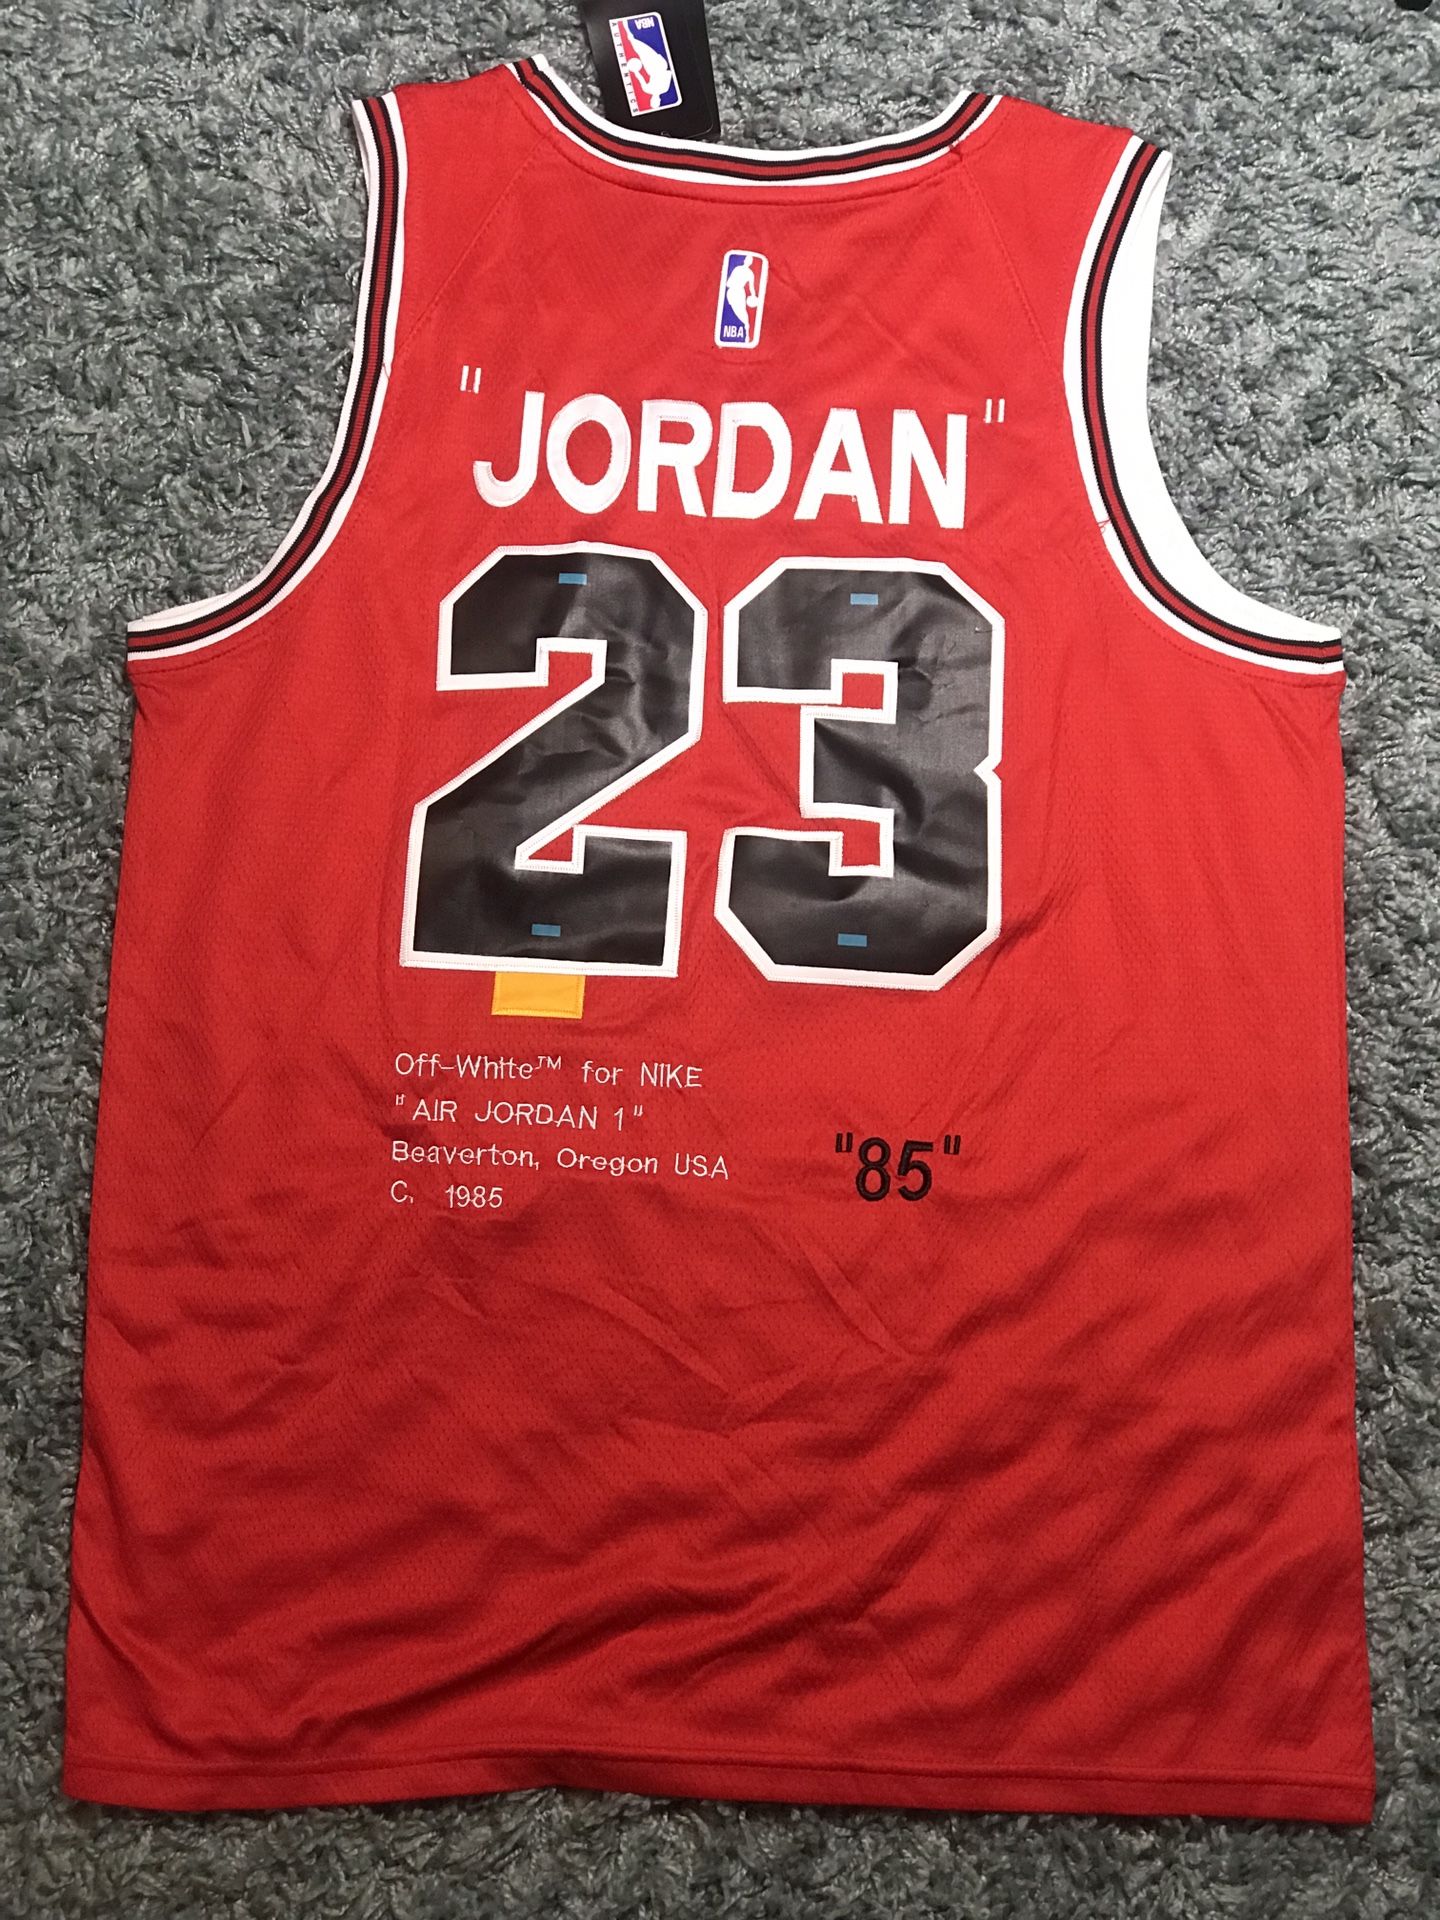 Michael Jordan Jersey for Sale in Old Saybrook, CT - OfferUp